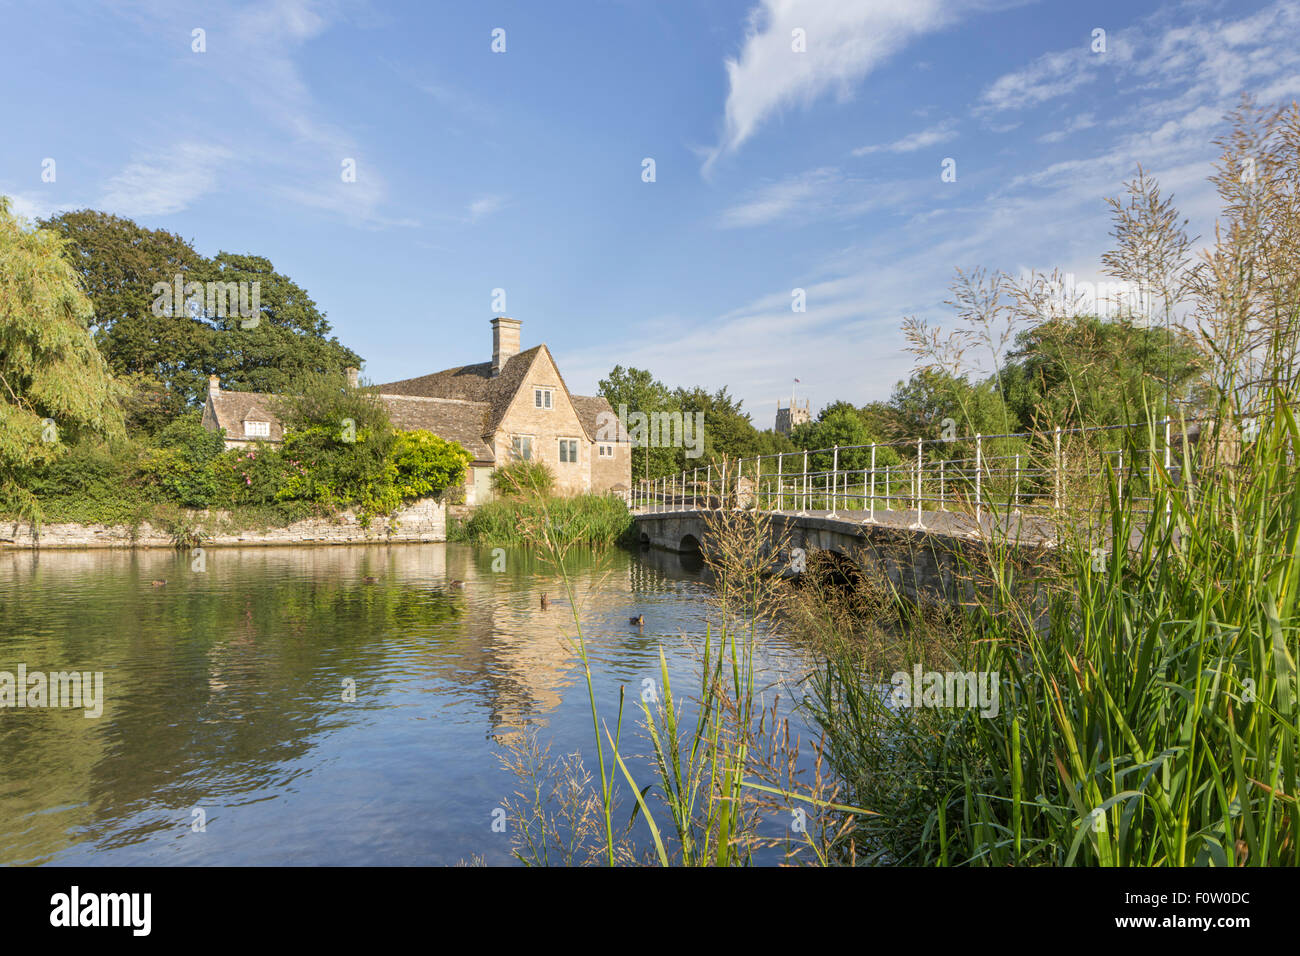 Fairford Mill on the River Coln, in the Cotswold market town of Fairford, Gloucestershire, England, UK Stock Photo